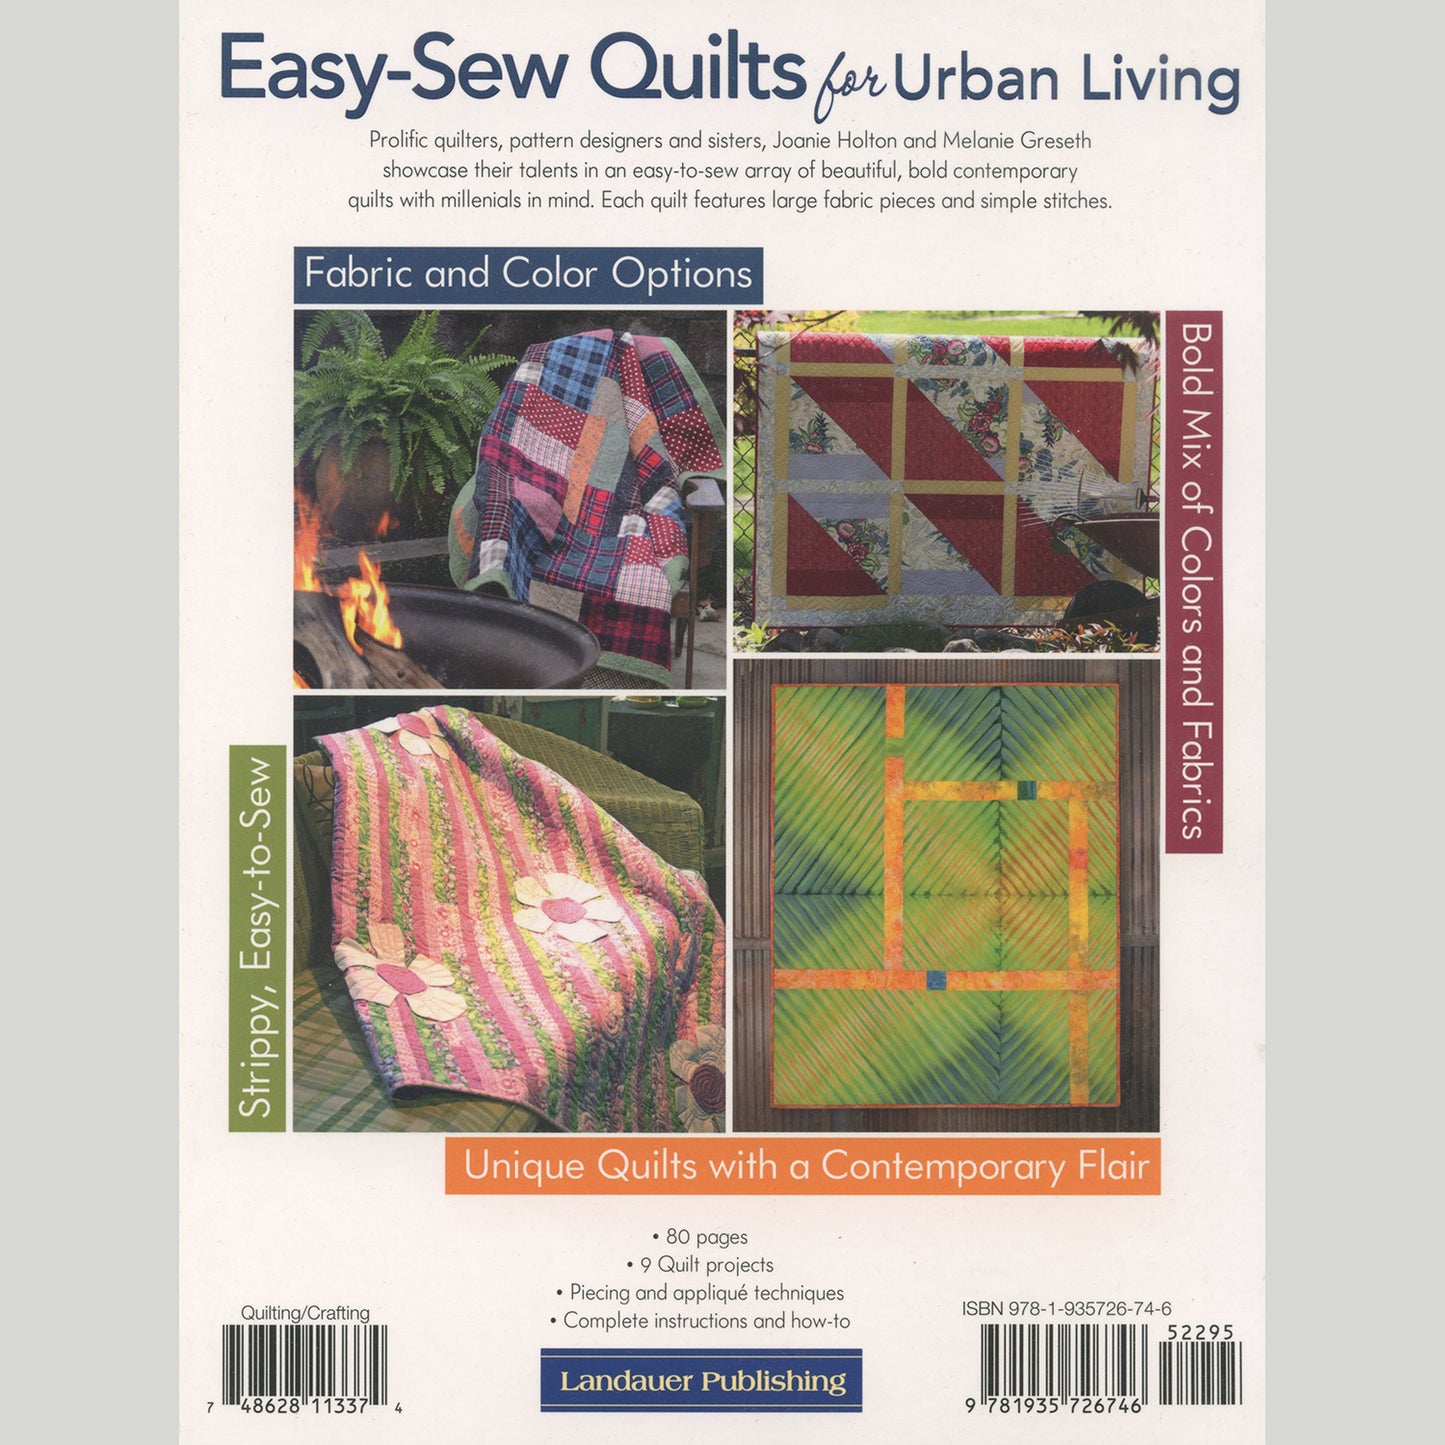 Easy-Sew Quilts for Urban Living Book Alternative View #1